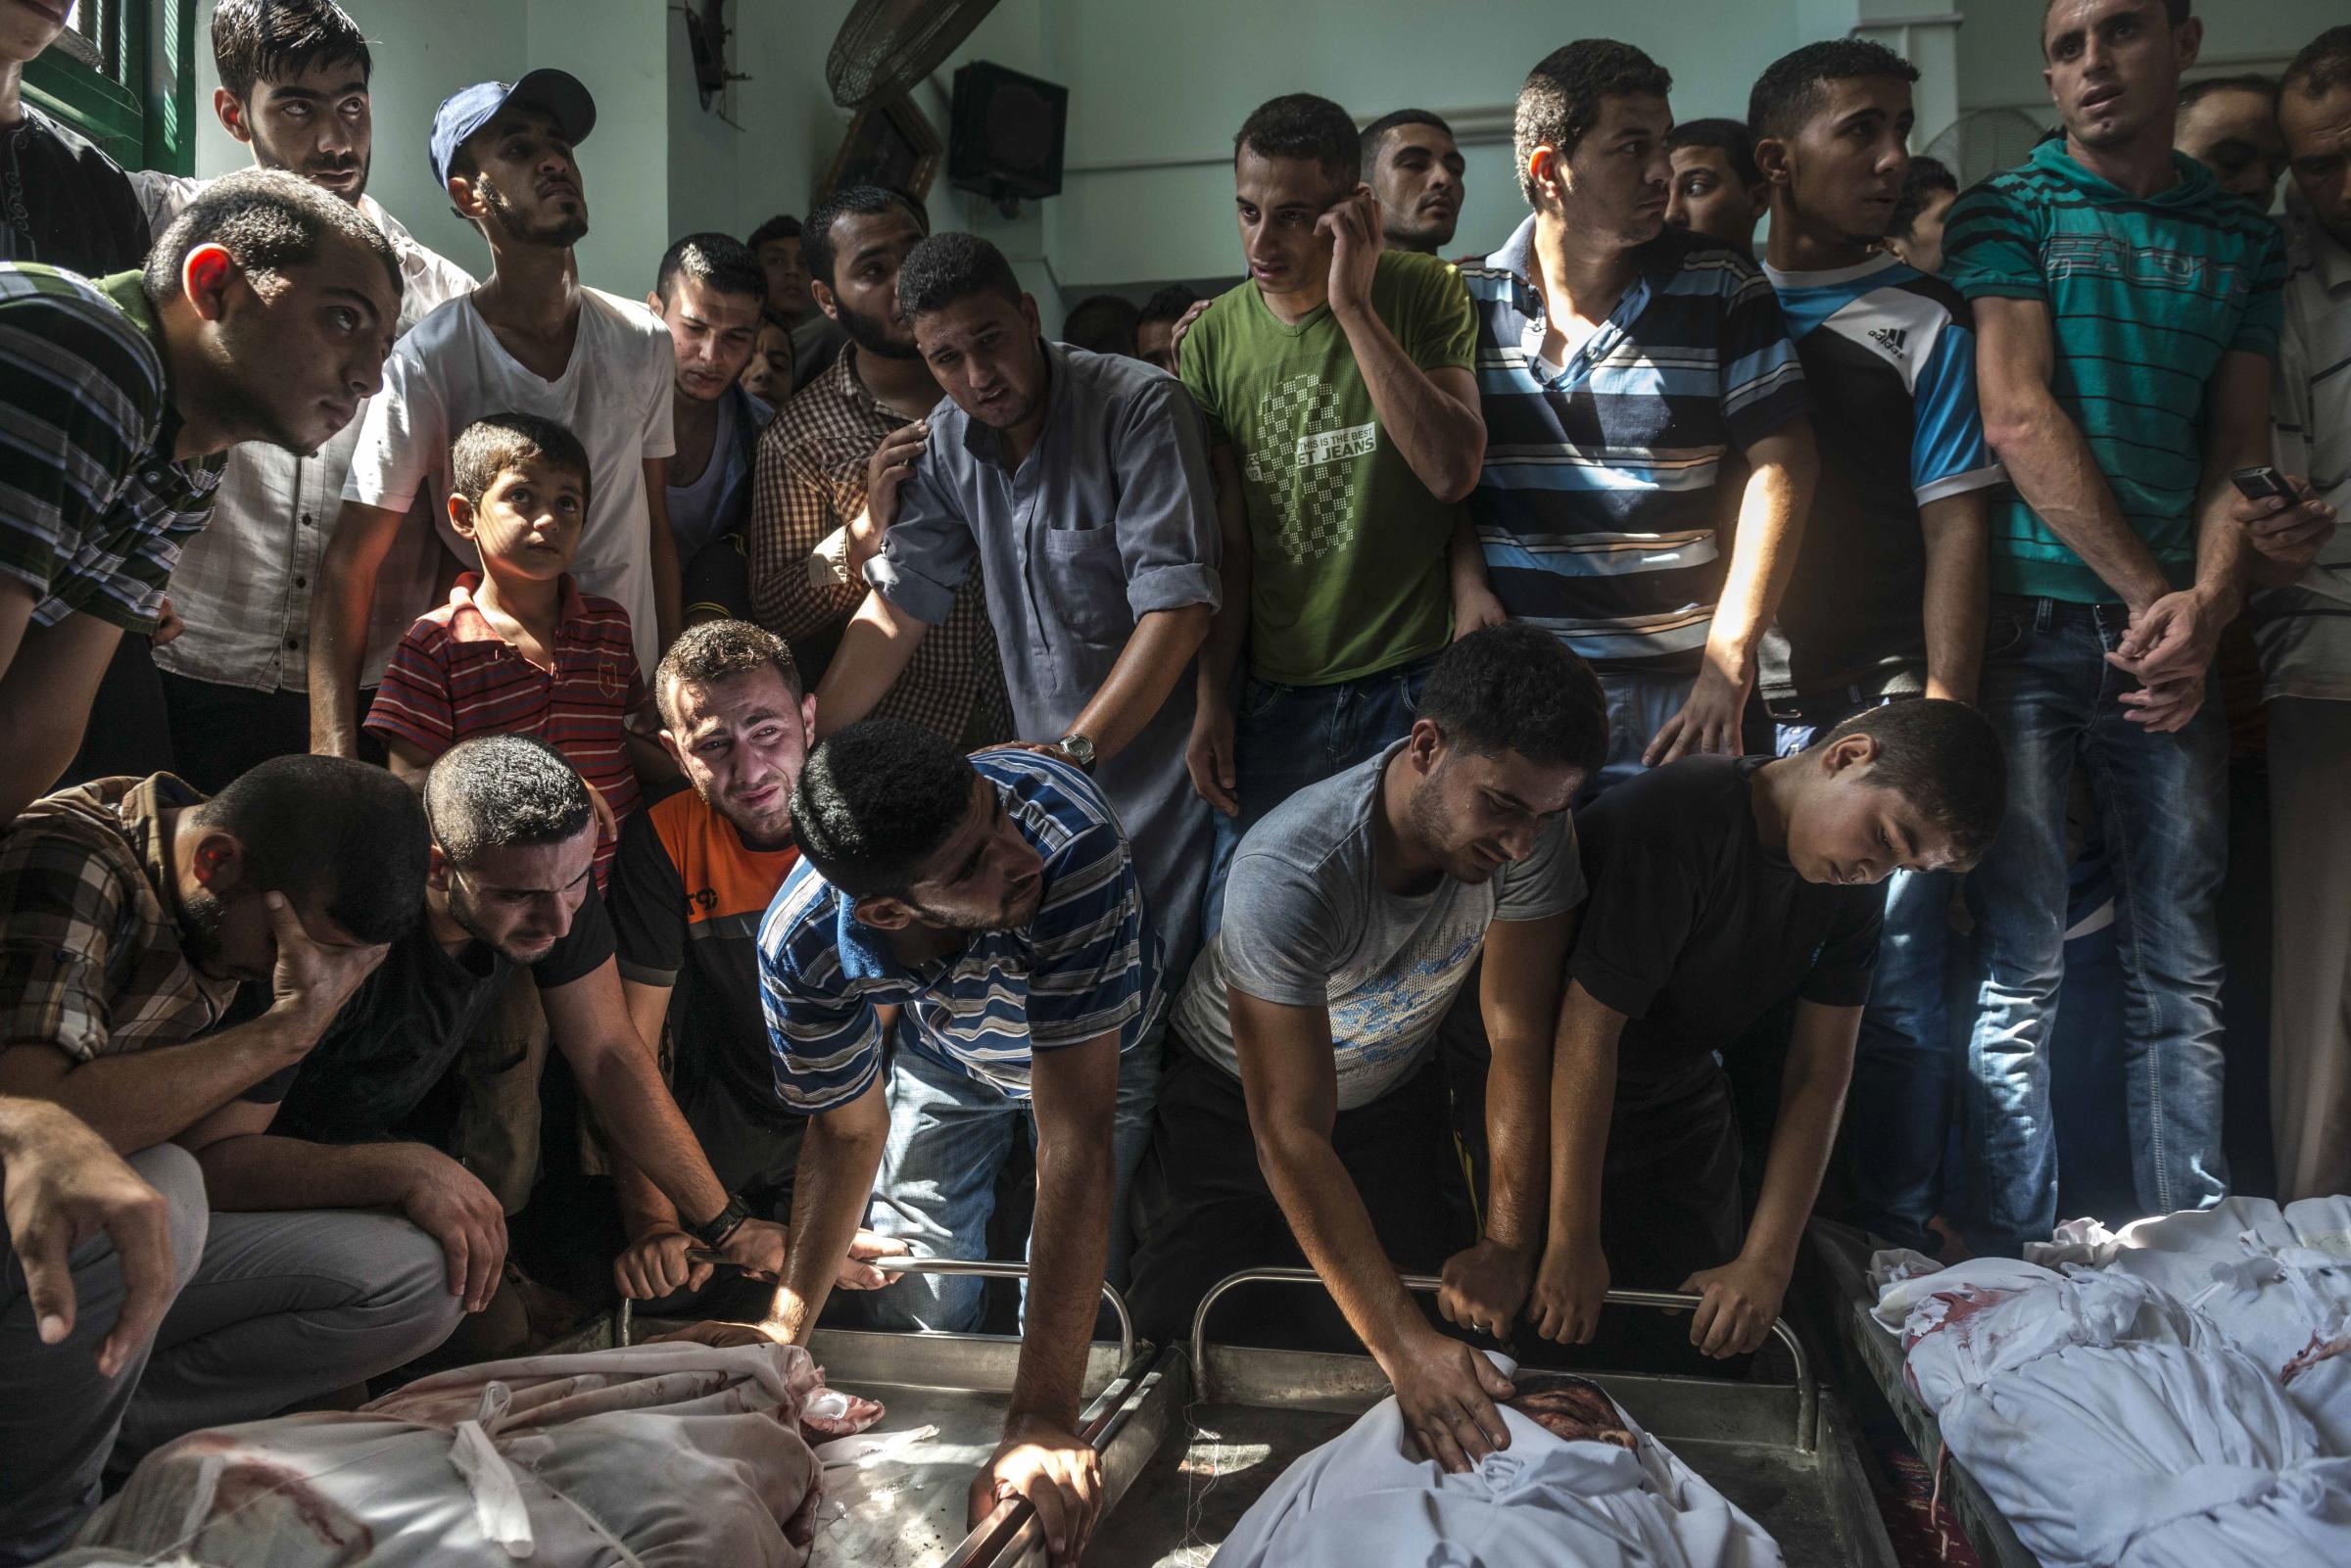 Palestinians mourn over the Nigim family, reportedly killed in an airstrike in Jabaliya on the Gaza Strip.